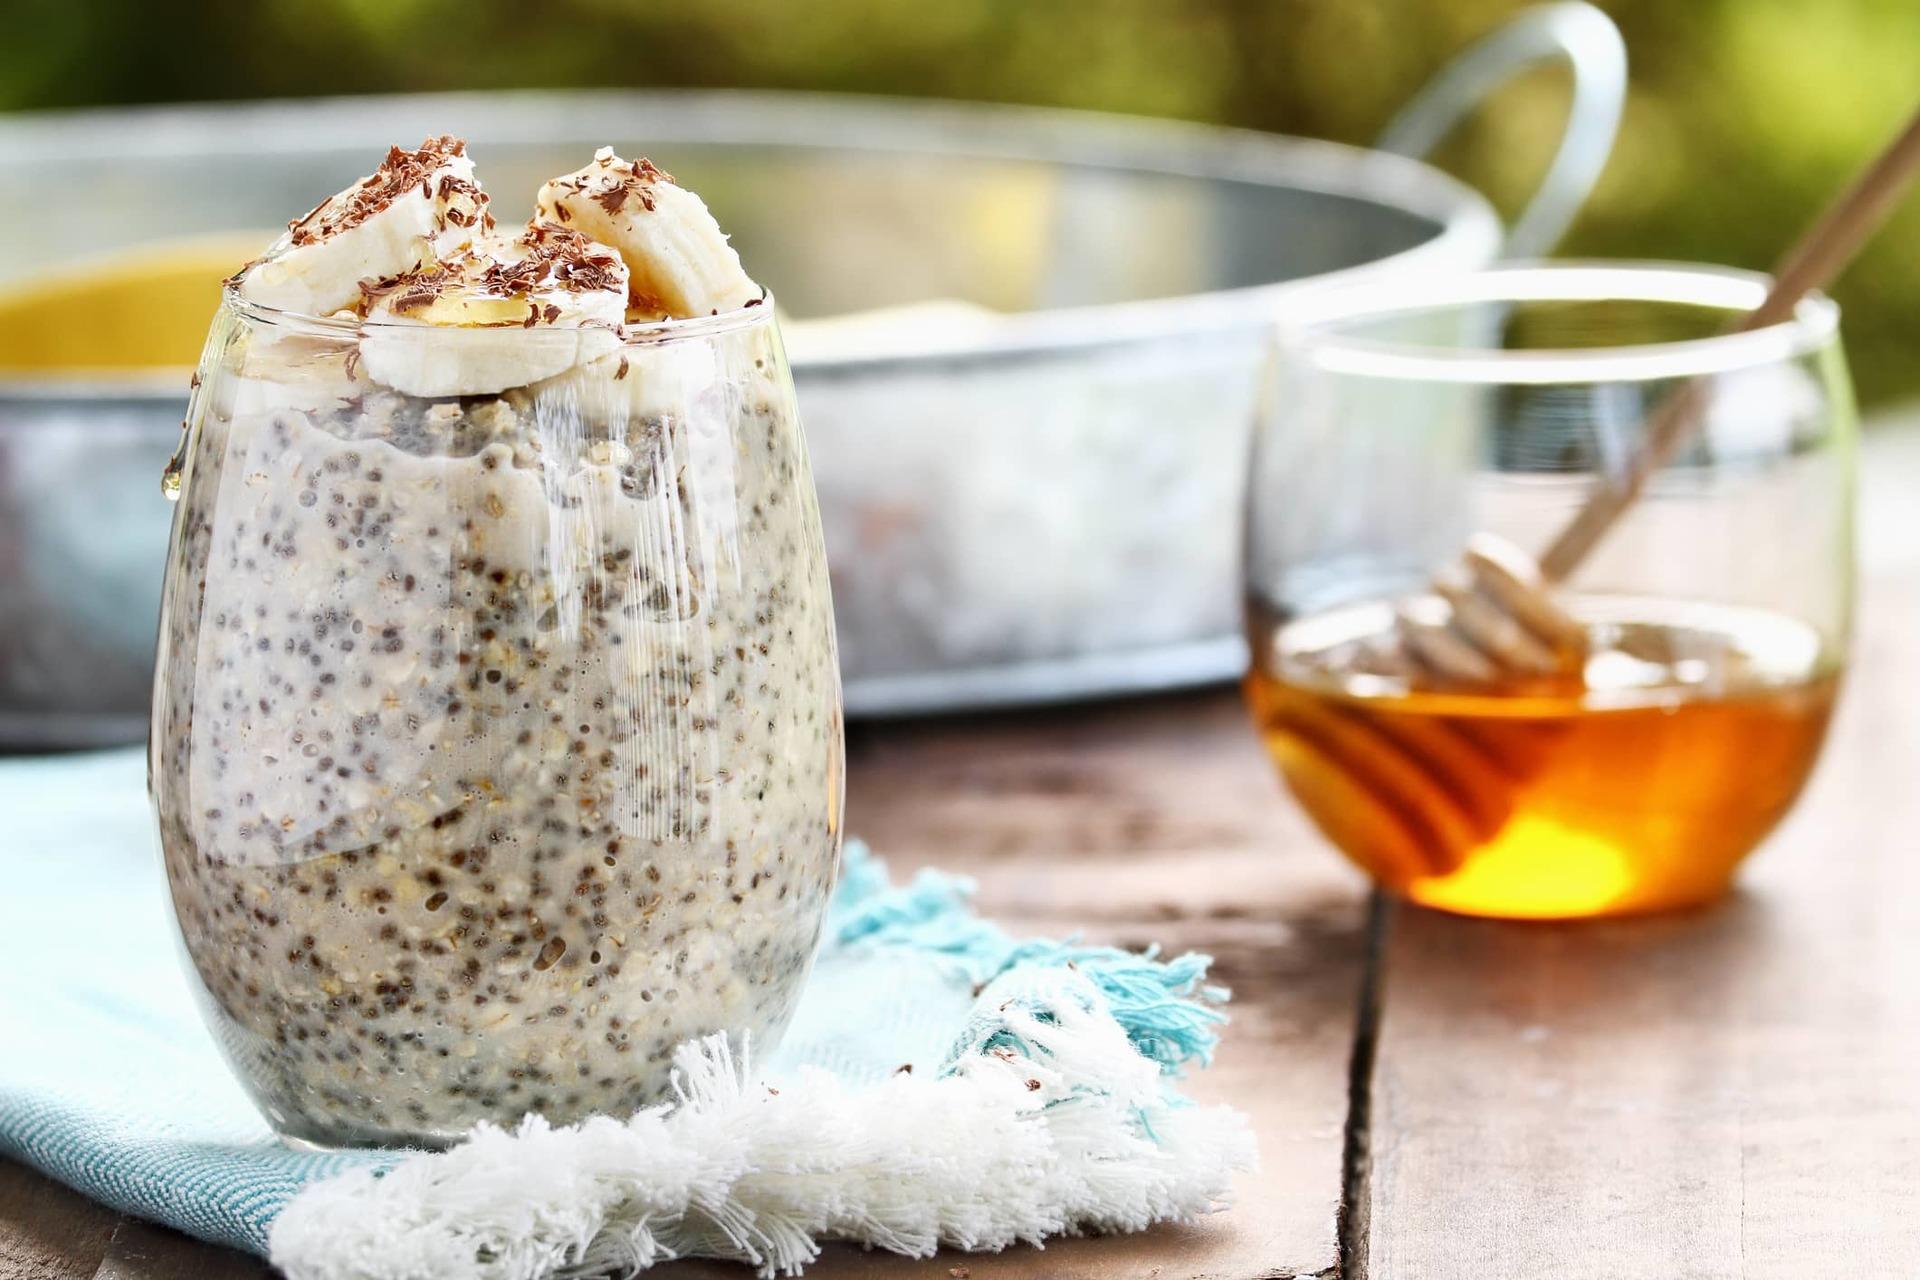 Recipe of the Week: Chocolate Almond Butter Overnight Oats